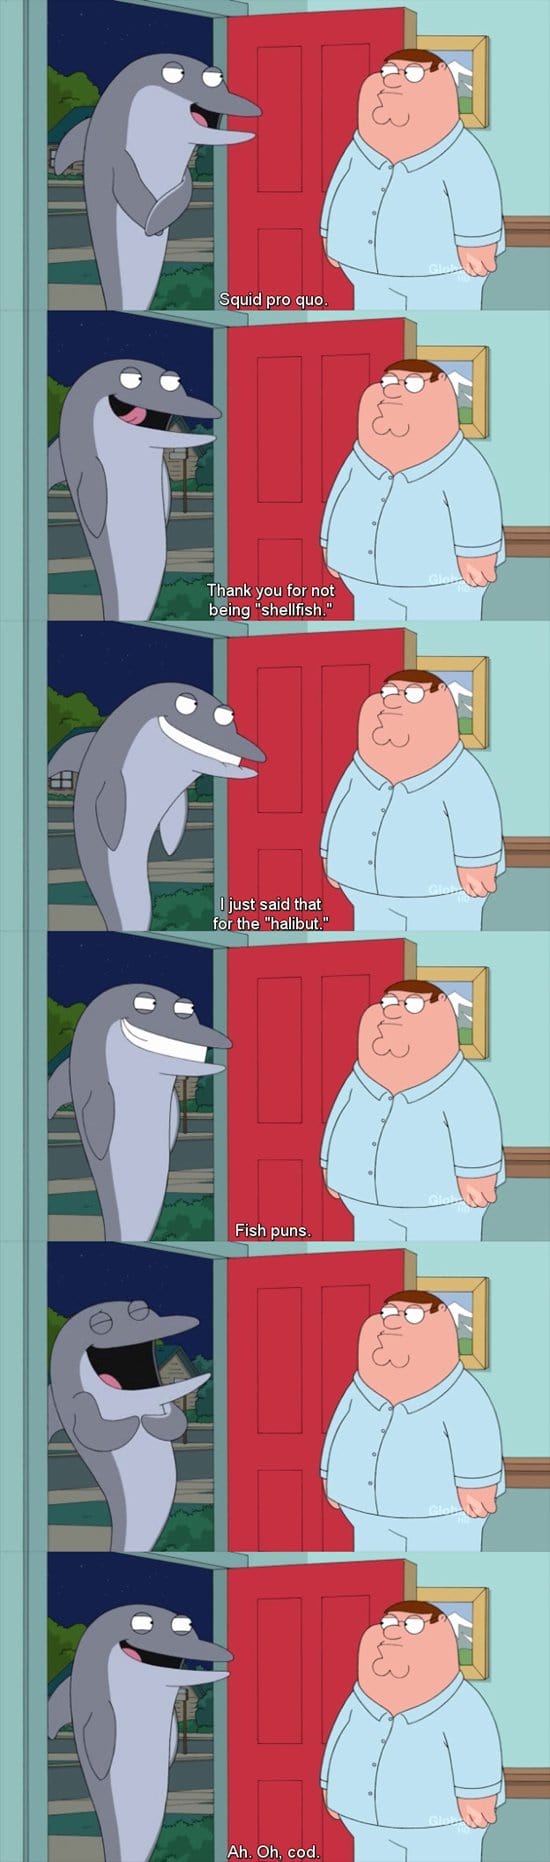 best-family-guy-moments-fish-puns